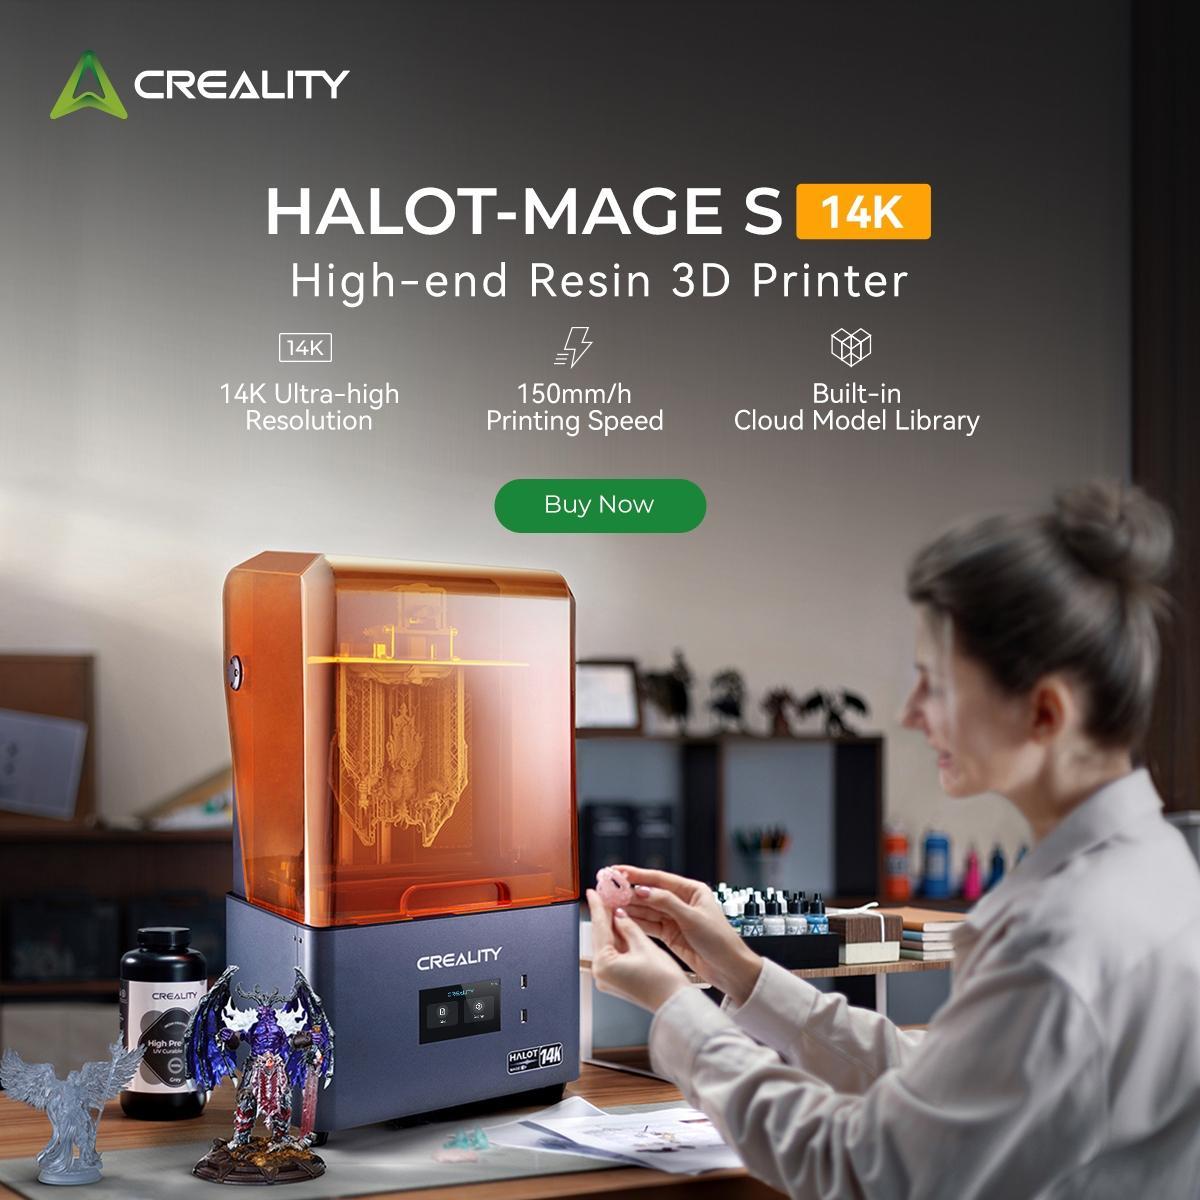 Fast, Detailed, And Easy To Use: The HALOT-MAGE S 14K